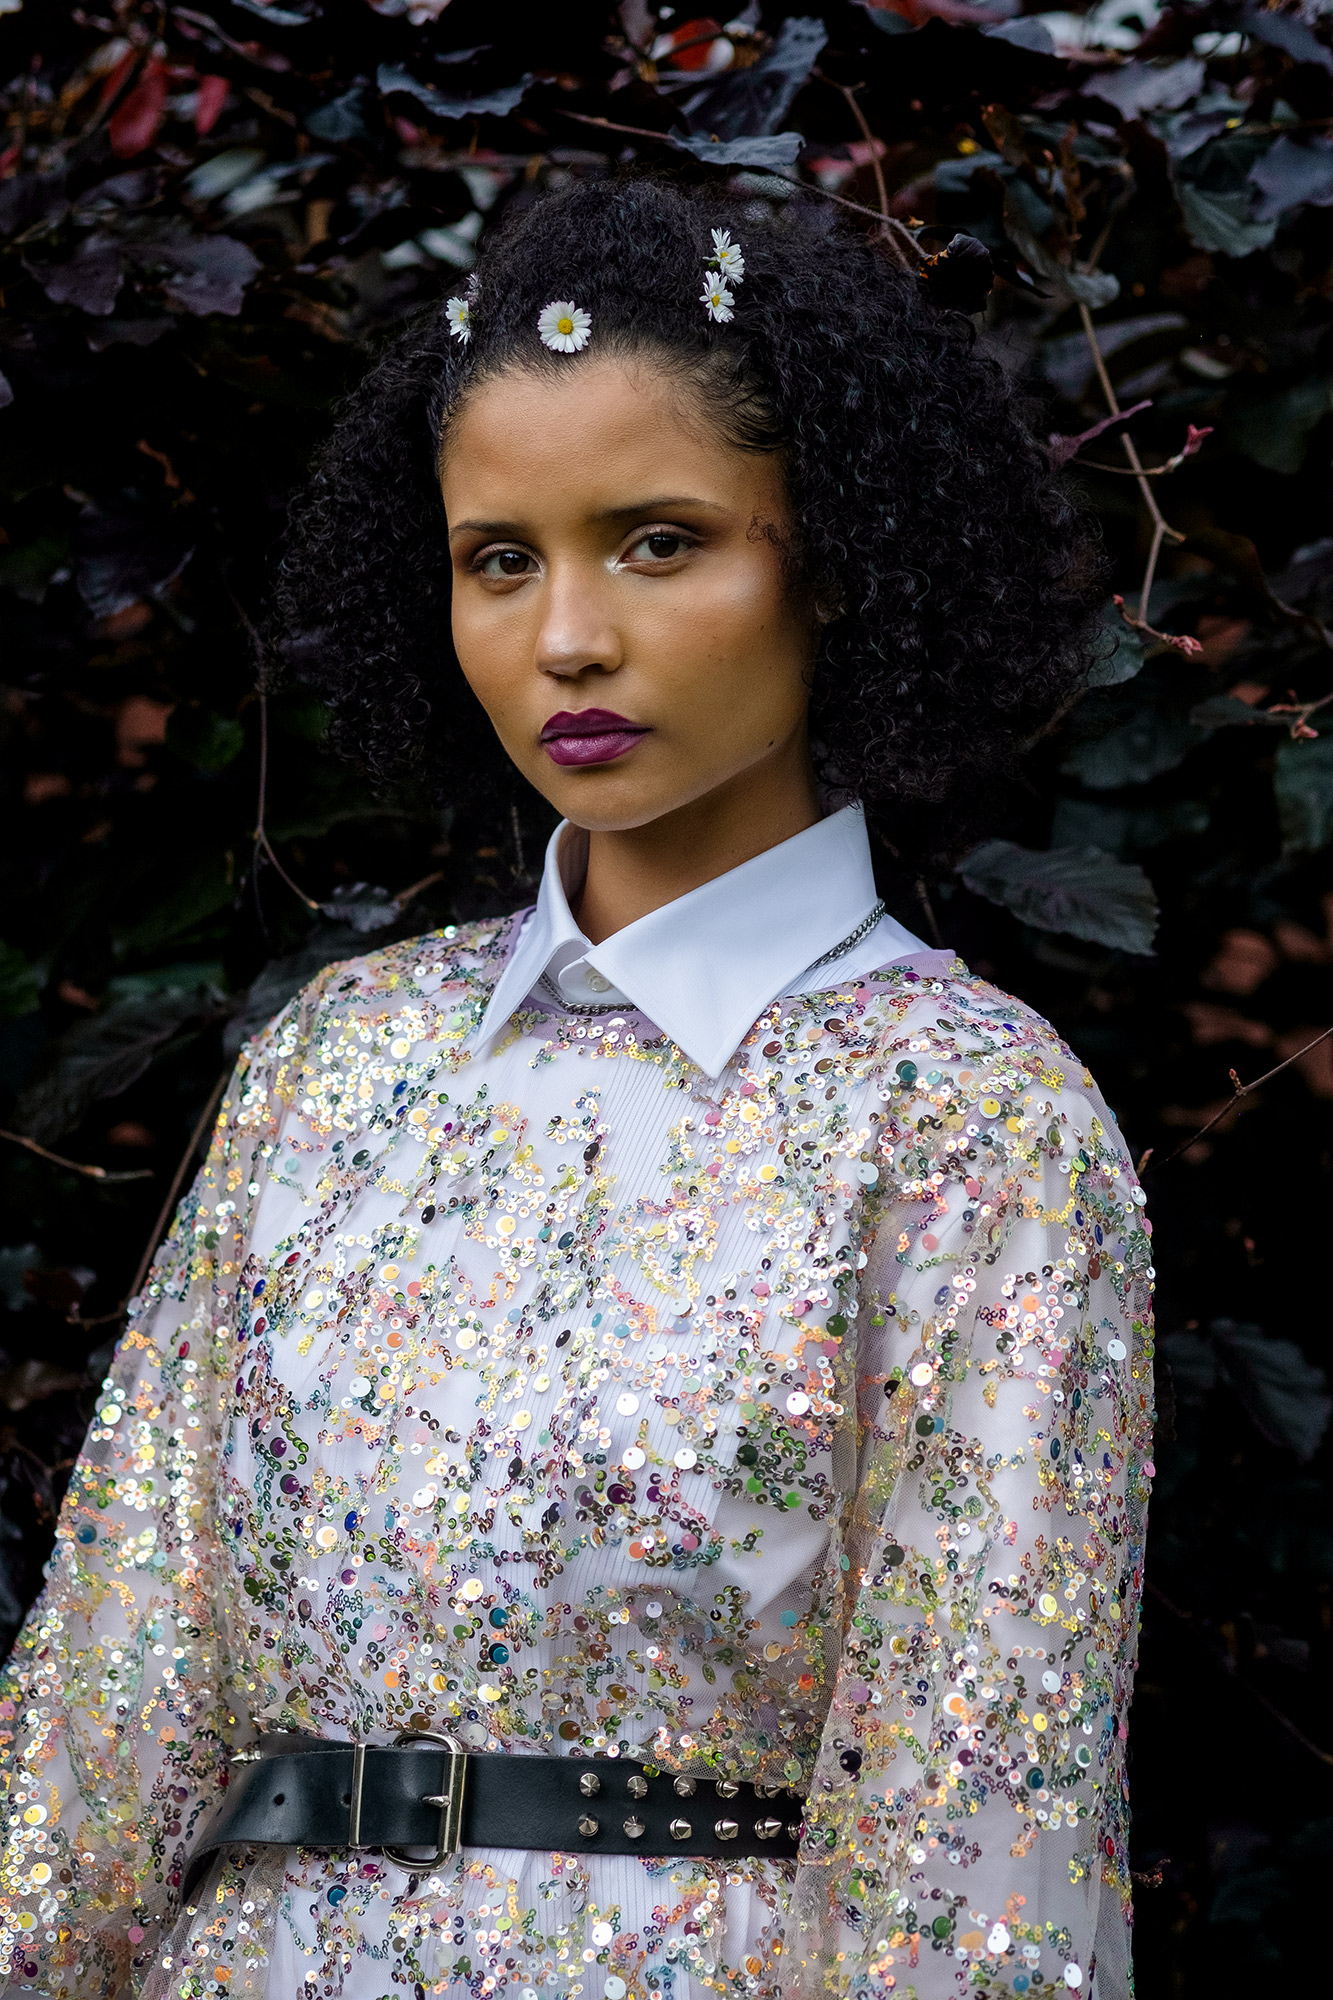 Krull magazine, Gardening Party, fashion story, model wearing sequin dress over tuxedo shirt with wildflowers in hair